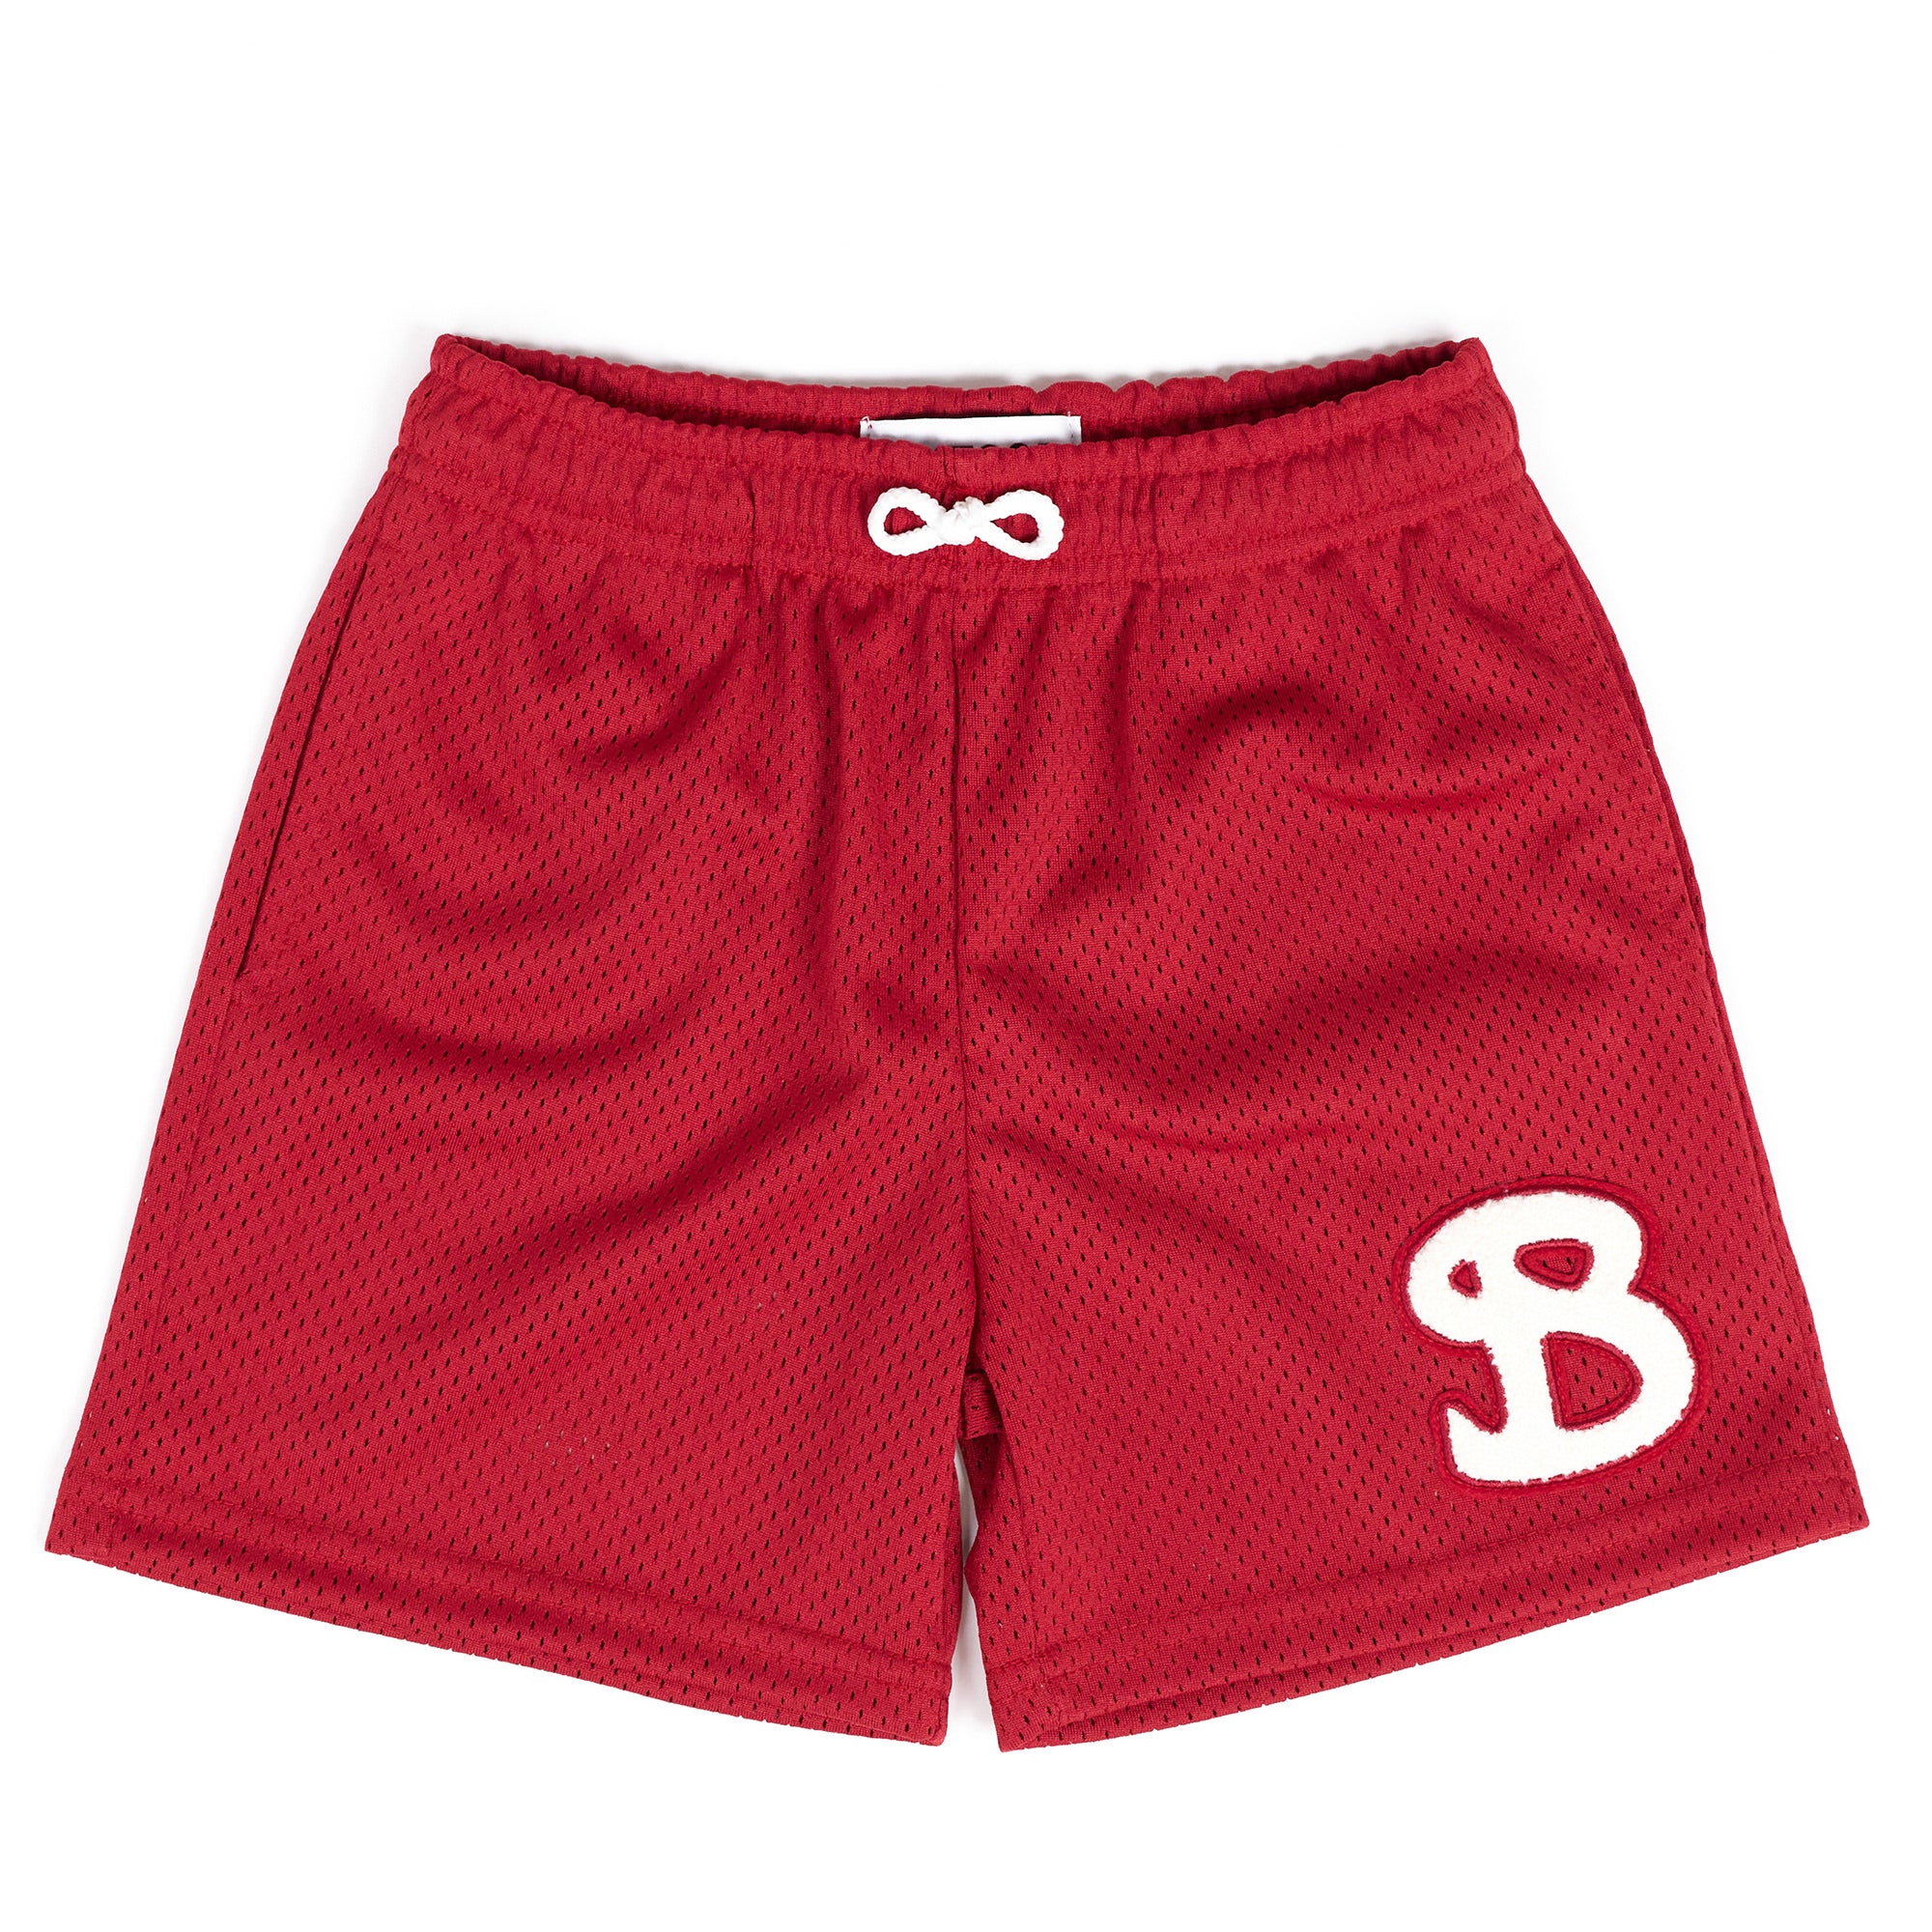 Classic Chenille Shorts Youth - Red